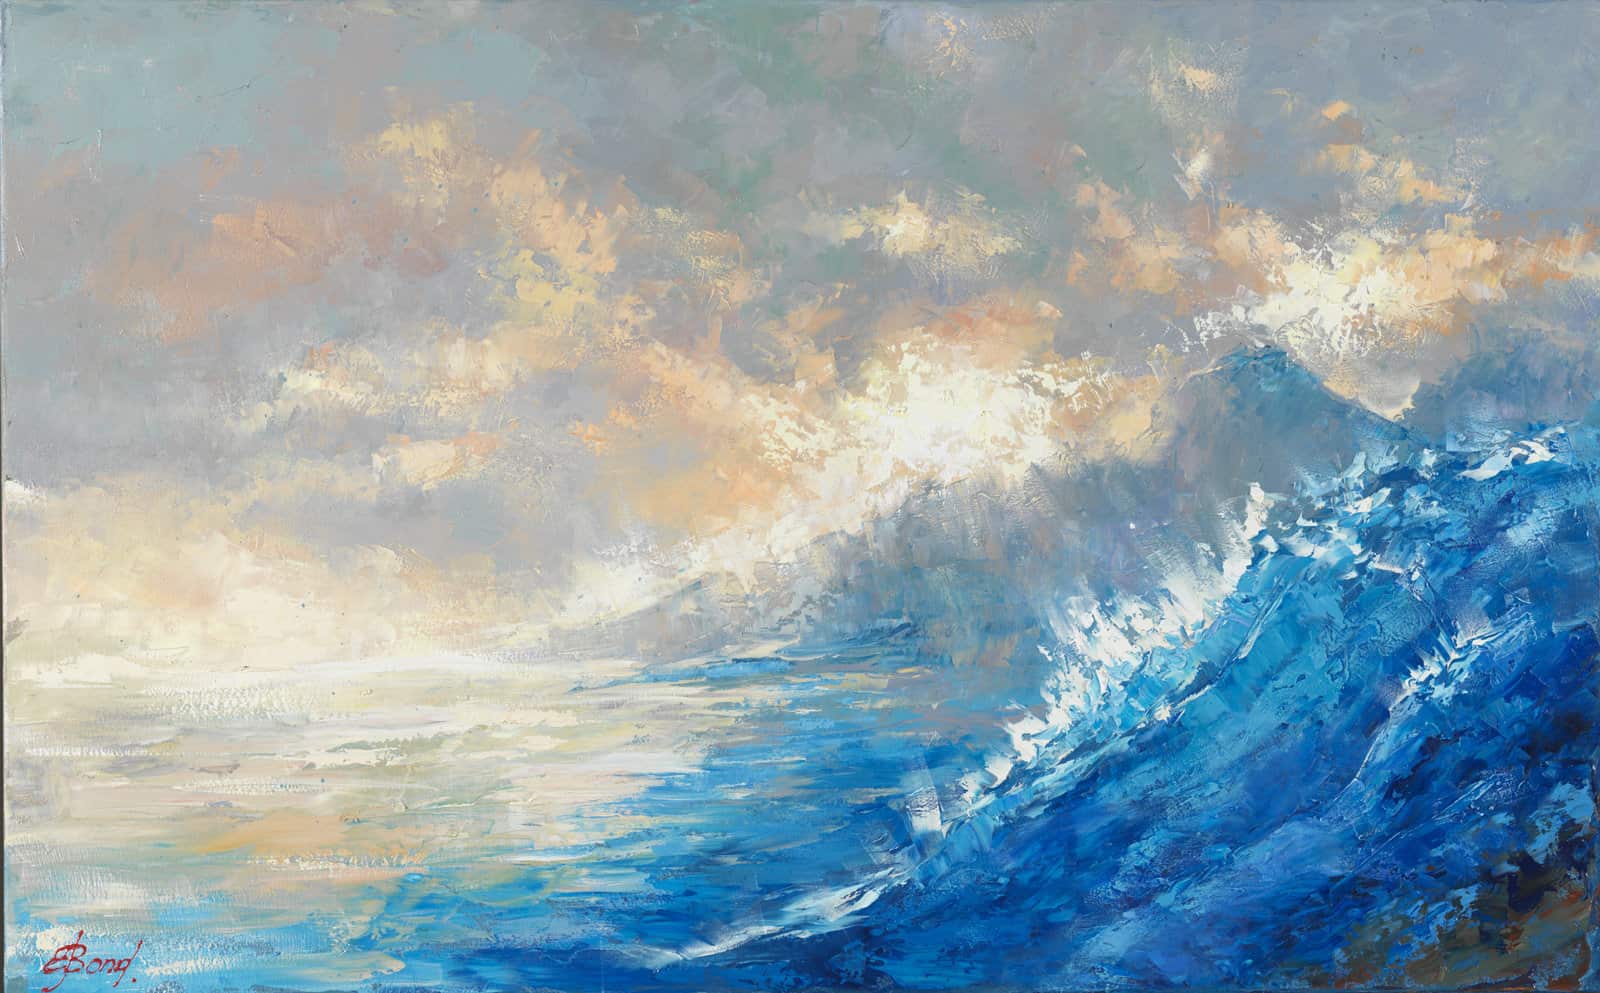 Buy a painting of waves called In Search of The Wave